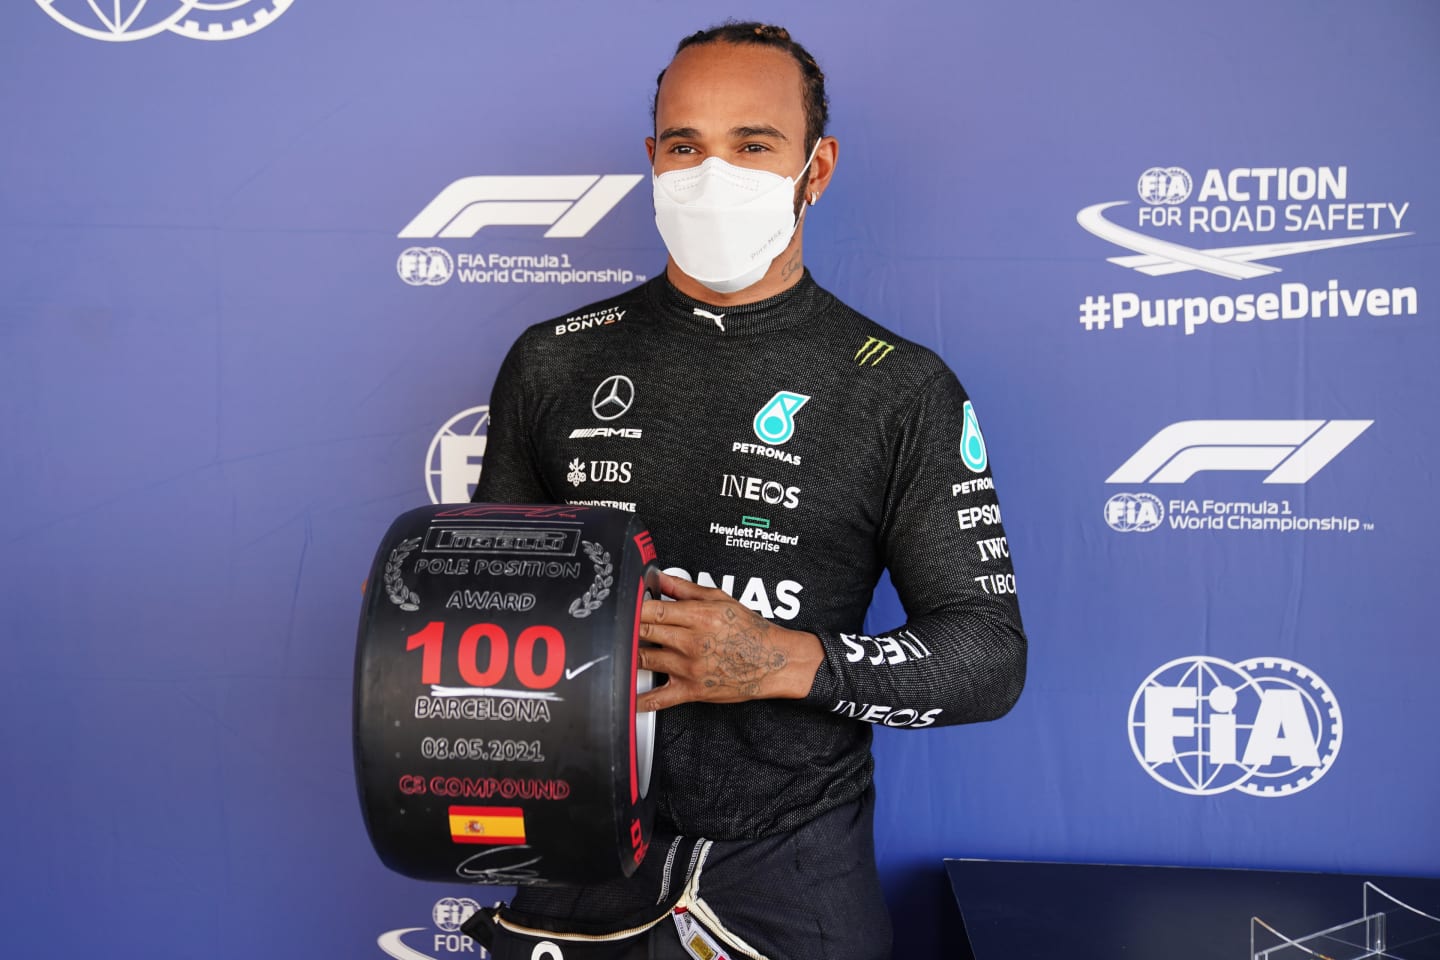 BARCELONA, SPAIN - MAY 08: Pole position qualifier Lewis Hamilton of Great Britain and Mercedes GP celebrates with his pole position award in parc ferme after qualifying for the F1 Grand Prix of Spain at Circuit de Barcelona-Catalunya on May 08, 2021 in Barcelona, Spain. (Photo by Emilio Morenatti - Pool/Getty Images)